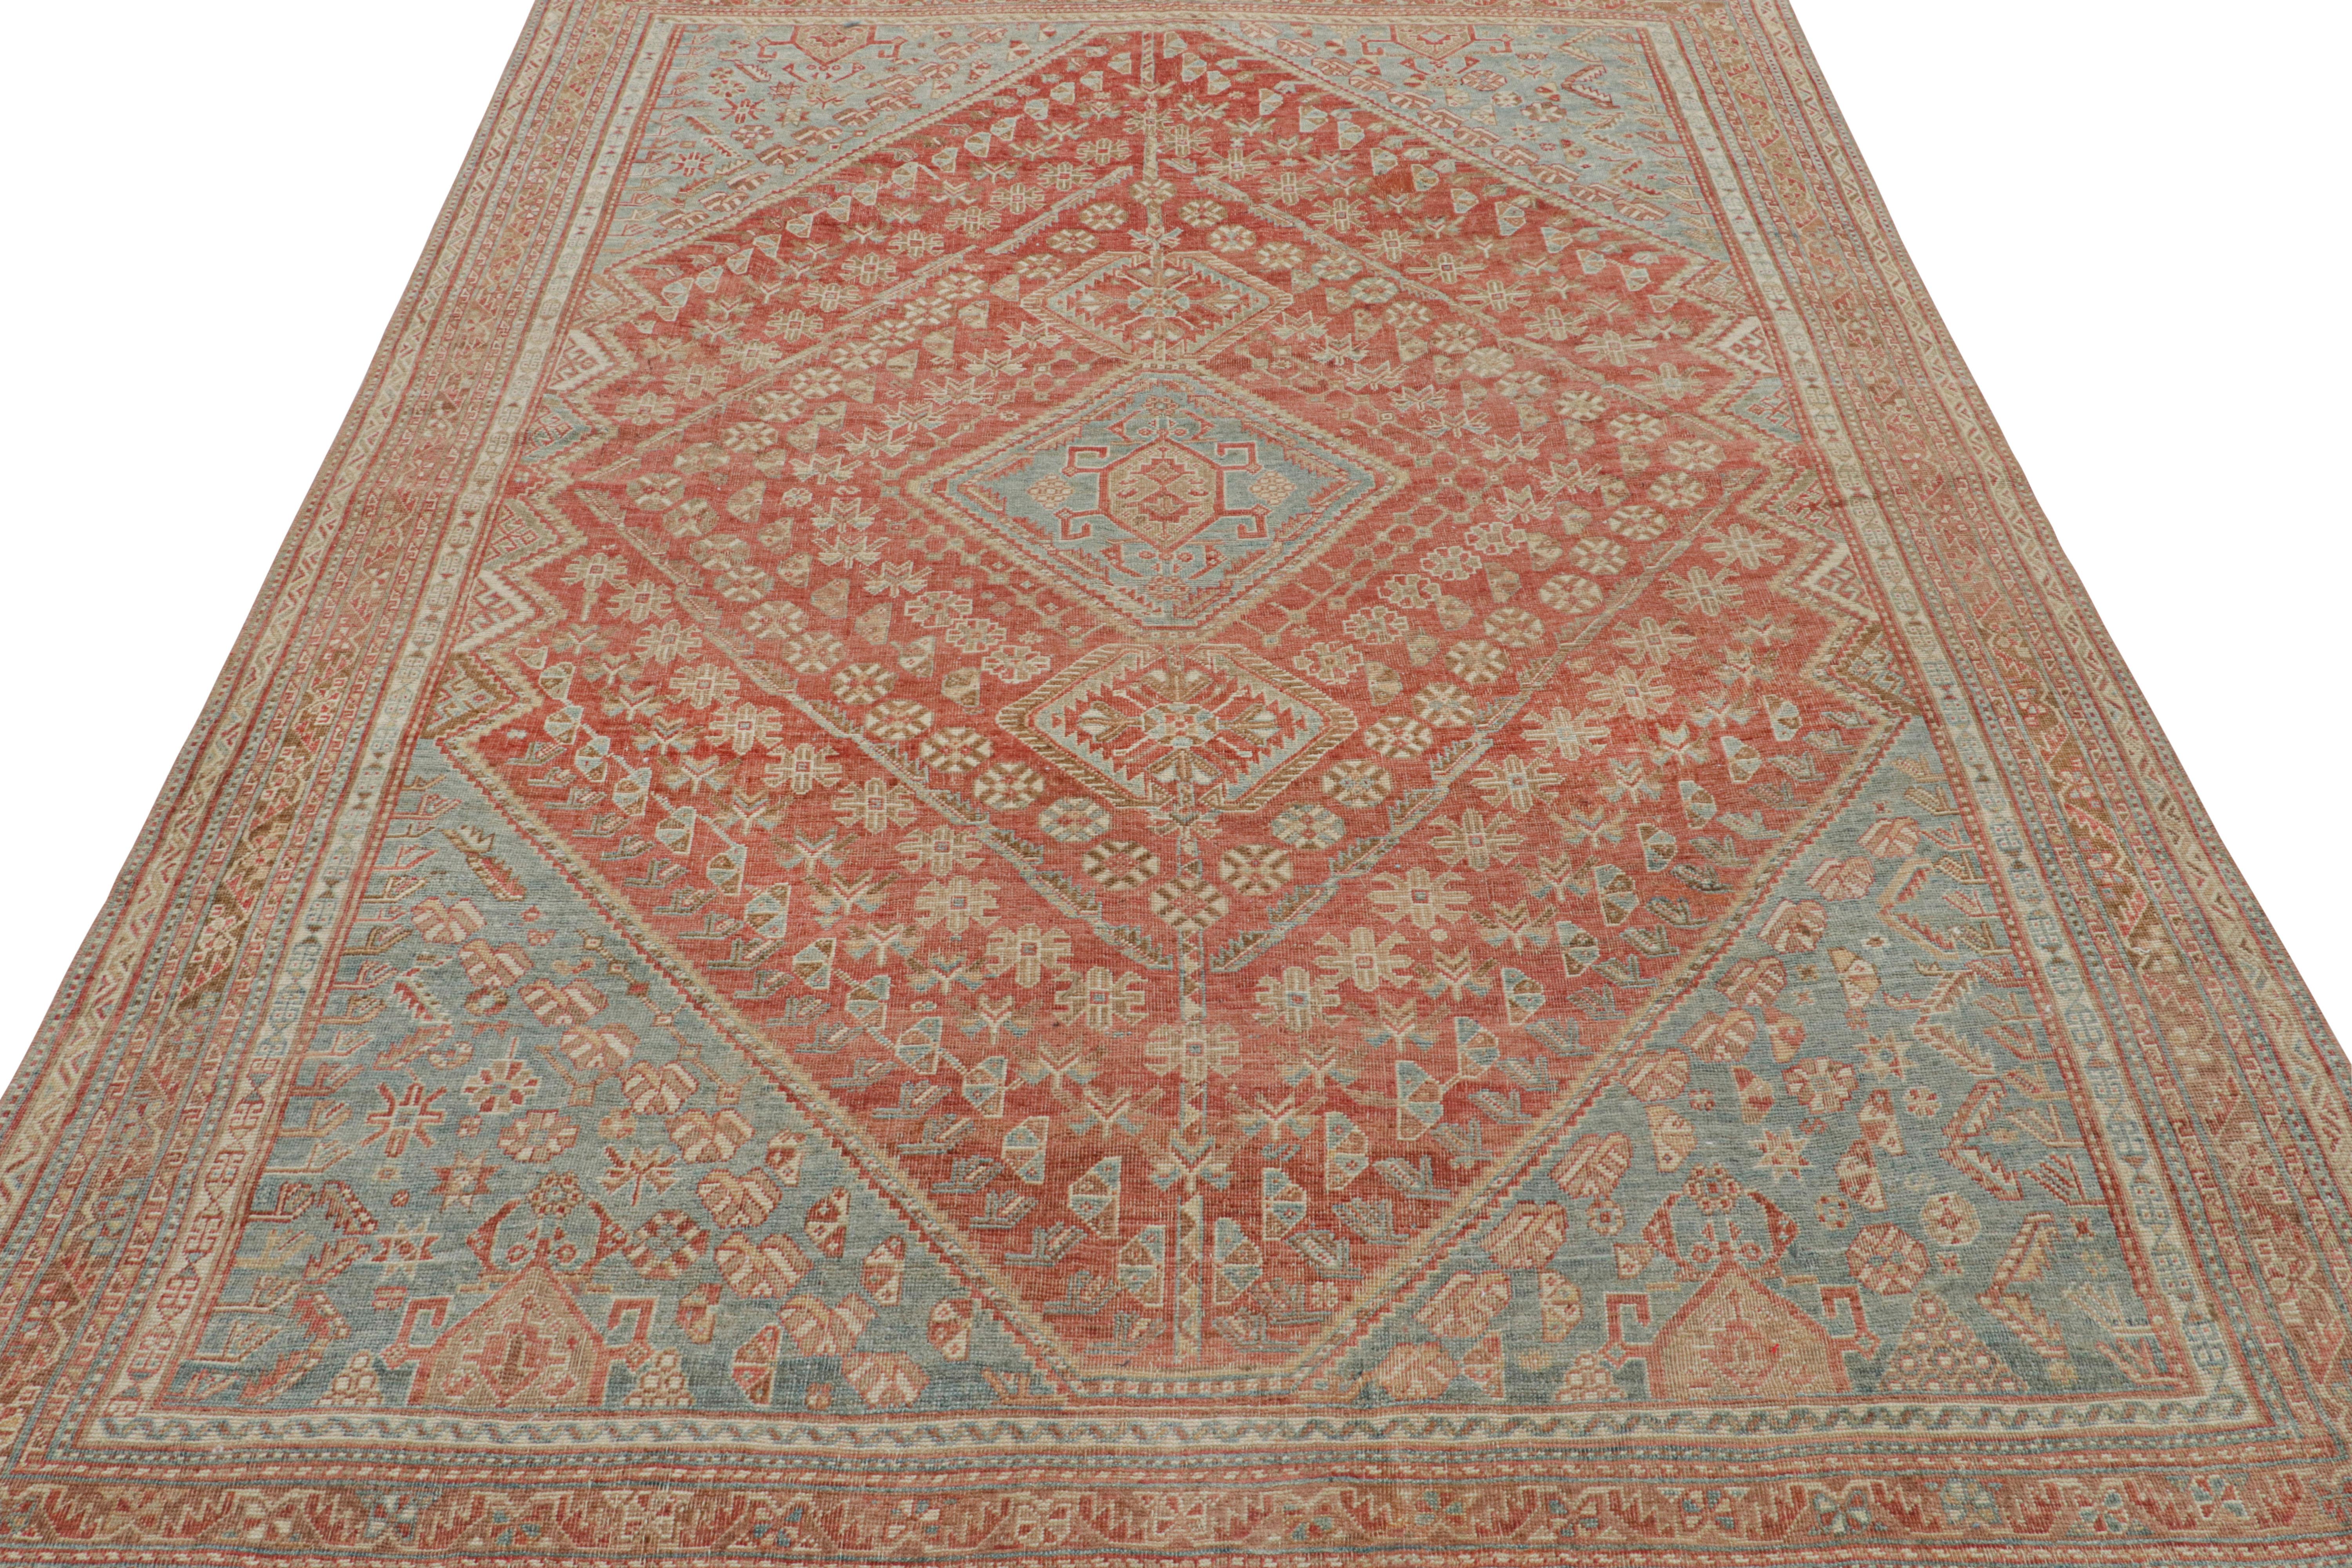 Hand-Knotted Vintage Ersari Rug in Red with Blue and Beige-Brown Patterns, from Rug & Kilim For Sale